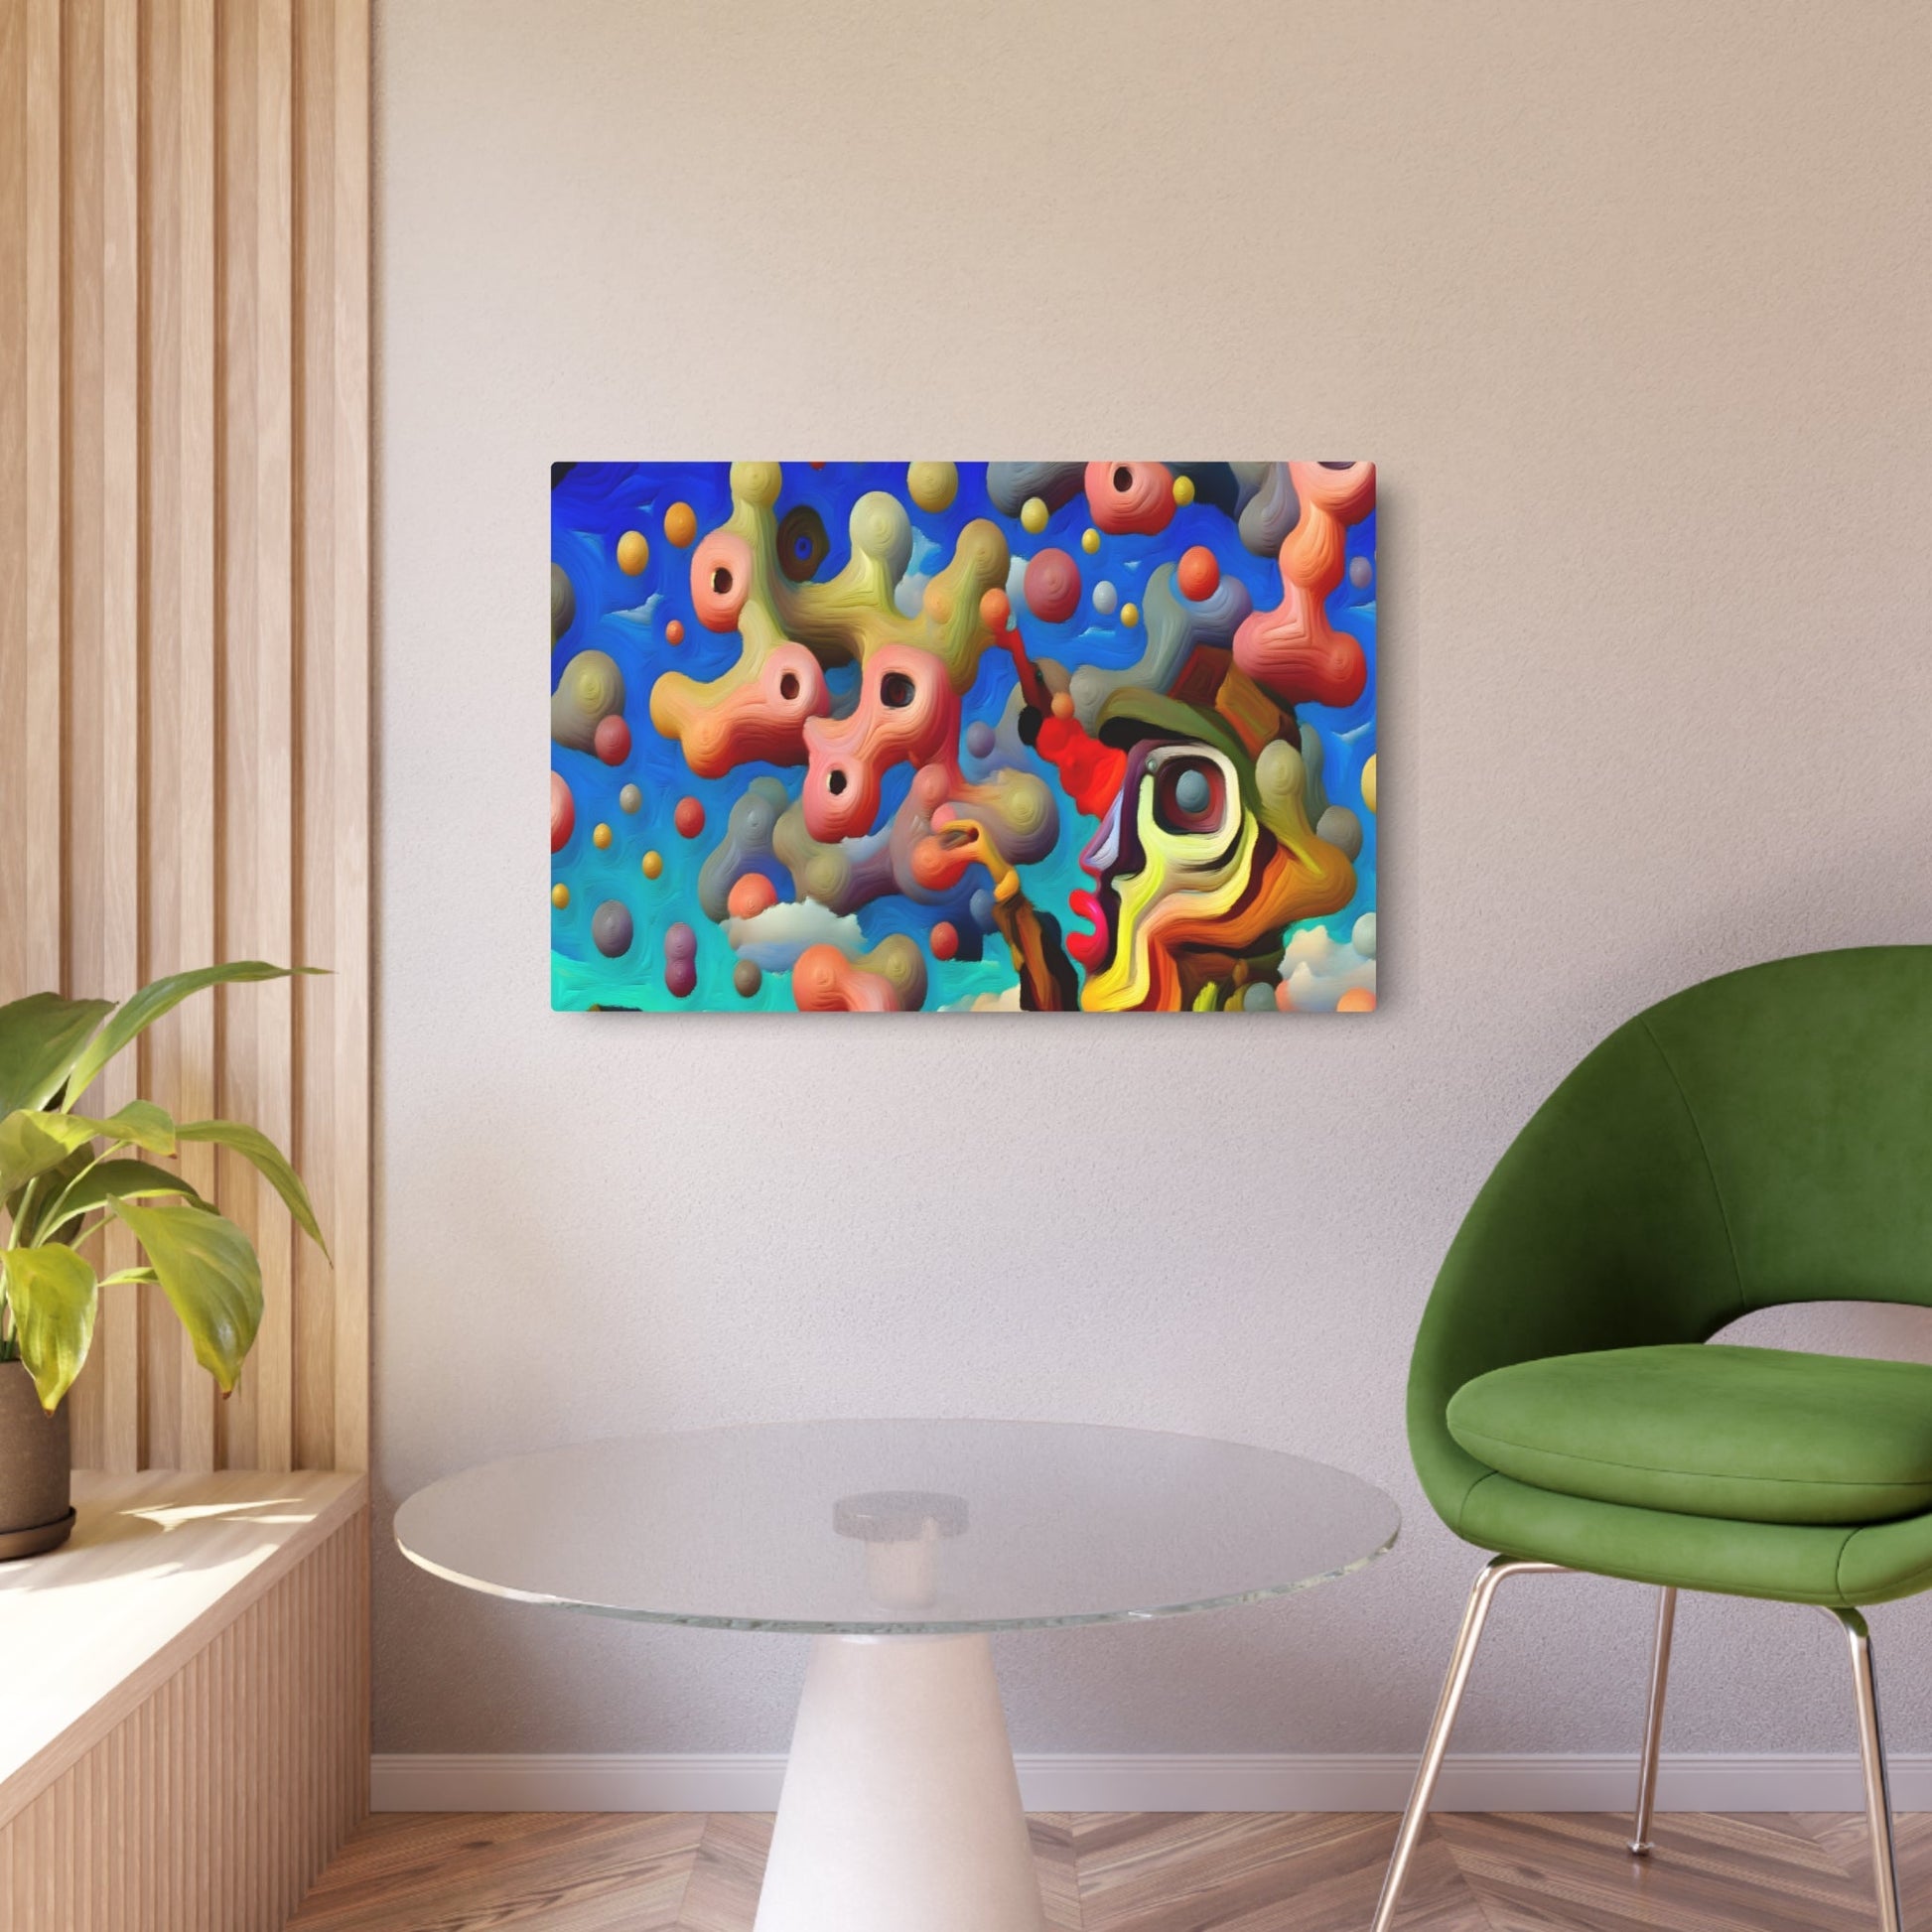 Metal Poster Art | "Modern Surrealism Art Inspired by Salvador Dalí - Dreamlike Landscape with Floating Objects and Exaggerated Forms - Contemporary Surrealist Wall Décor - Metal Poster Art 36″ x 24″ (Horizontal) 0.12''